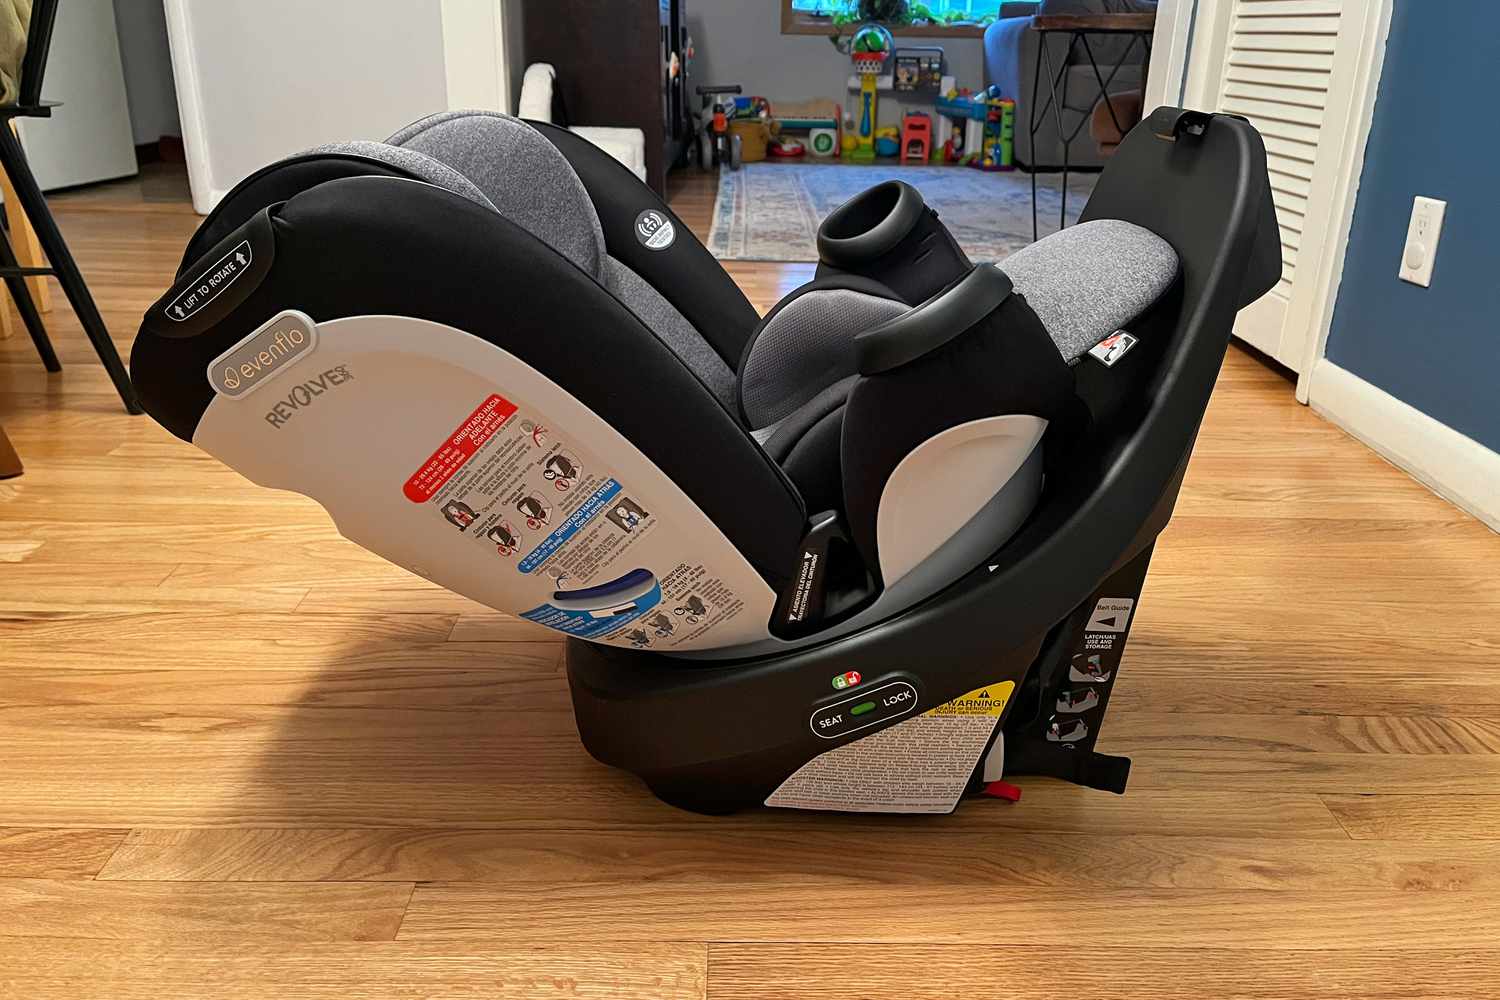 The Evenflo Gold Revolve360 Rotational All-In-One Convertible Car Seat rotated to face the opposite way